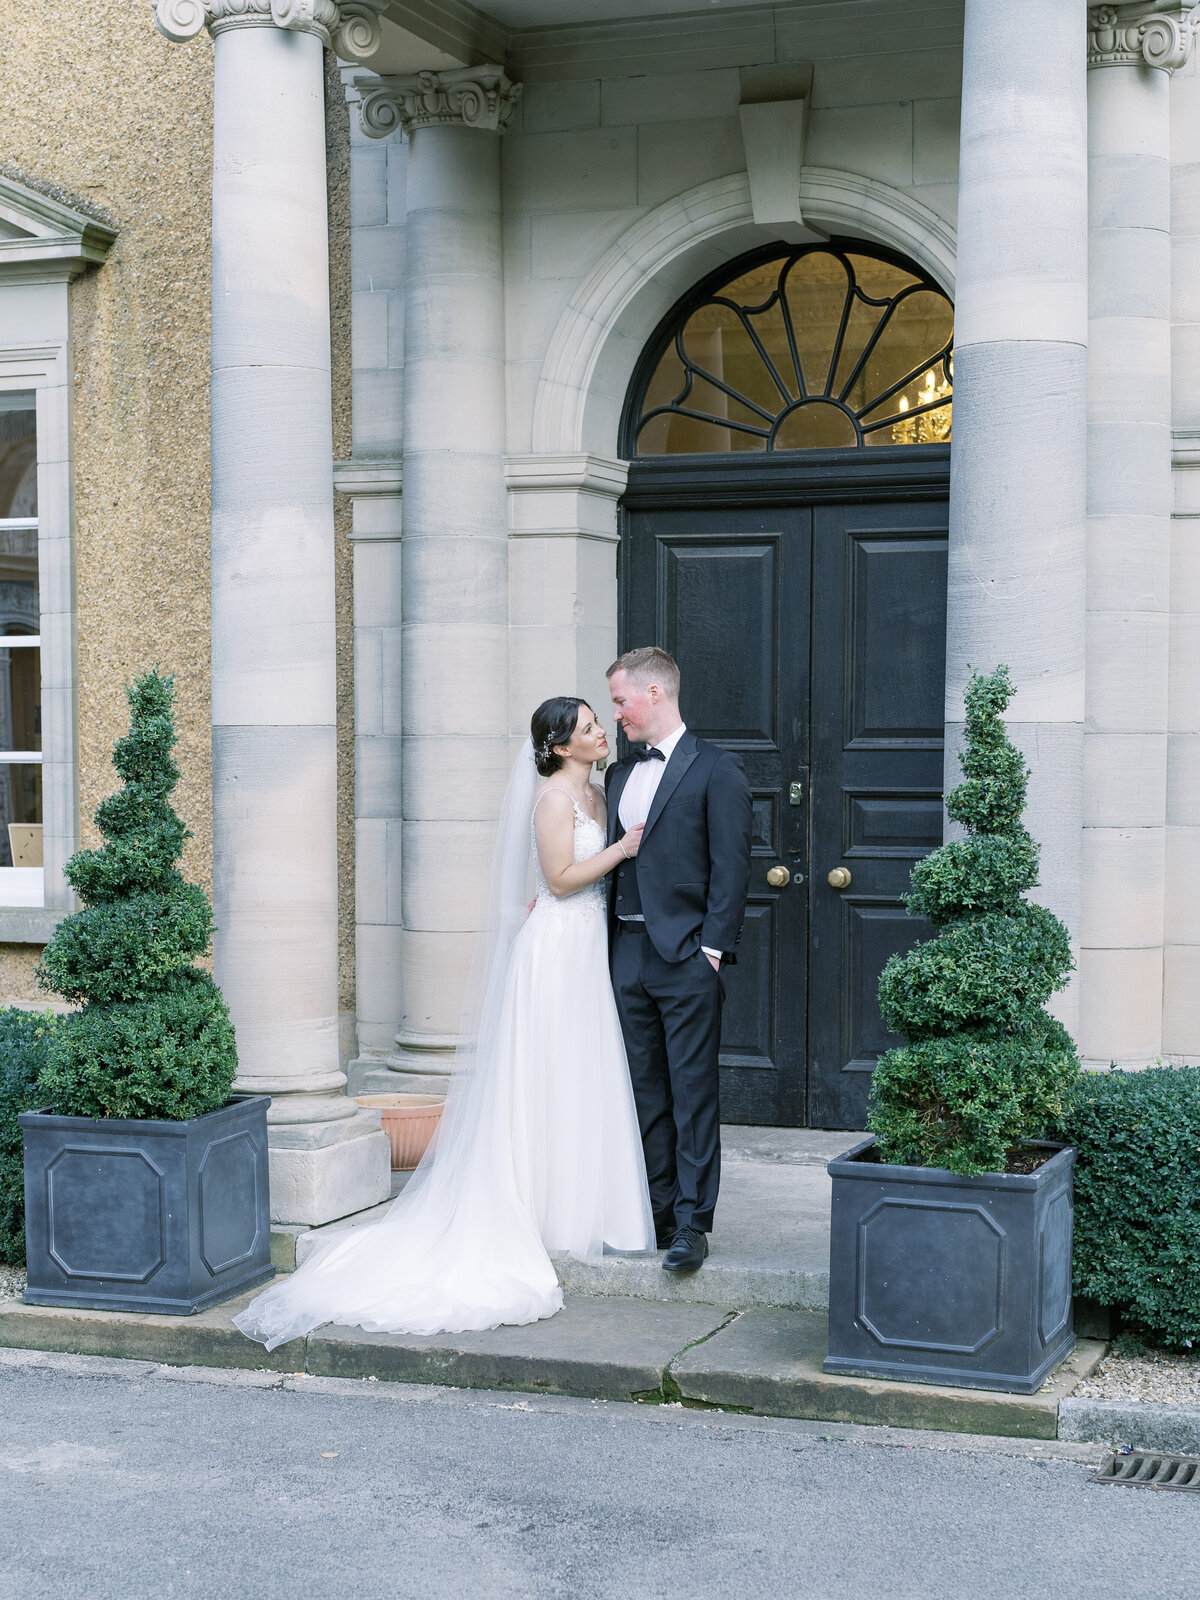 Bride and groom outside country house wedding venue Bourton Hall